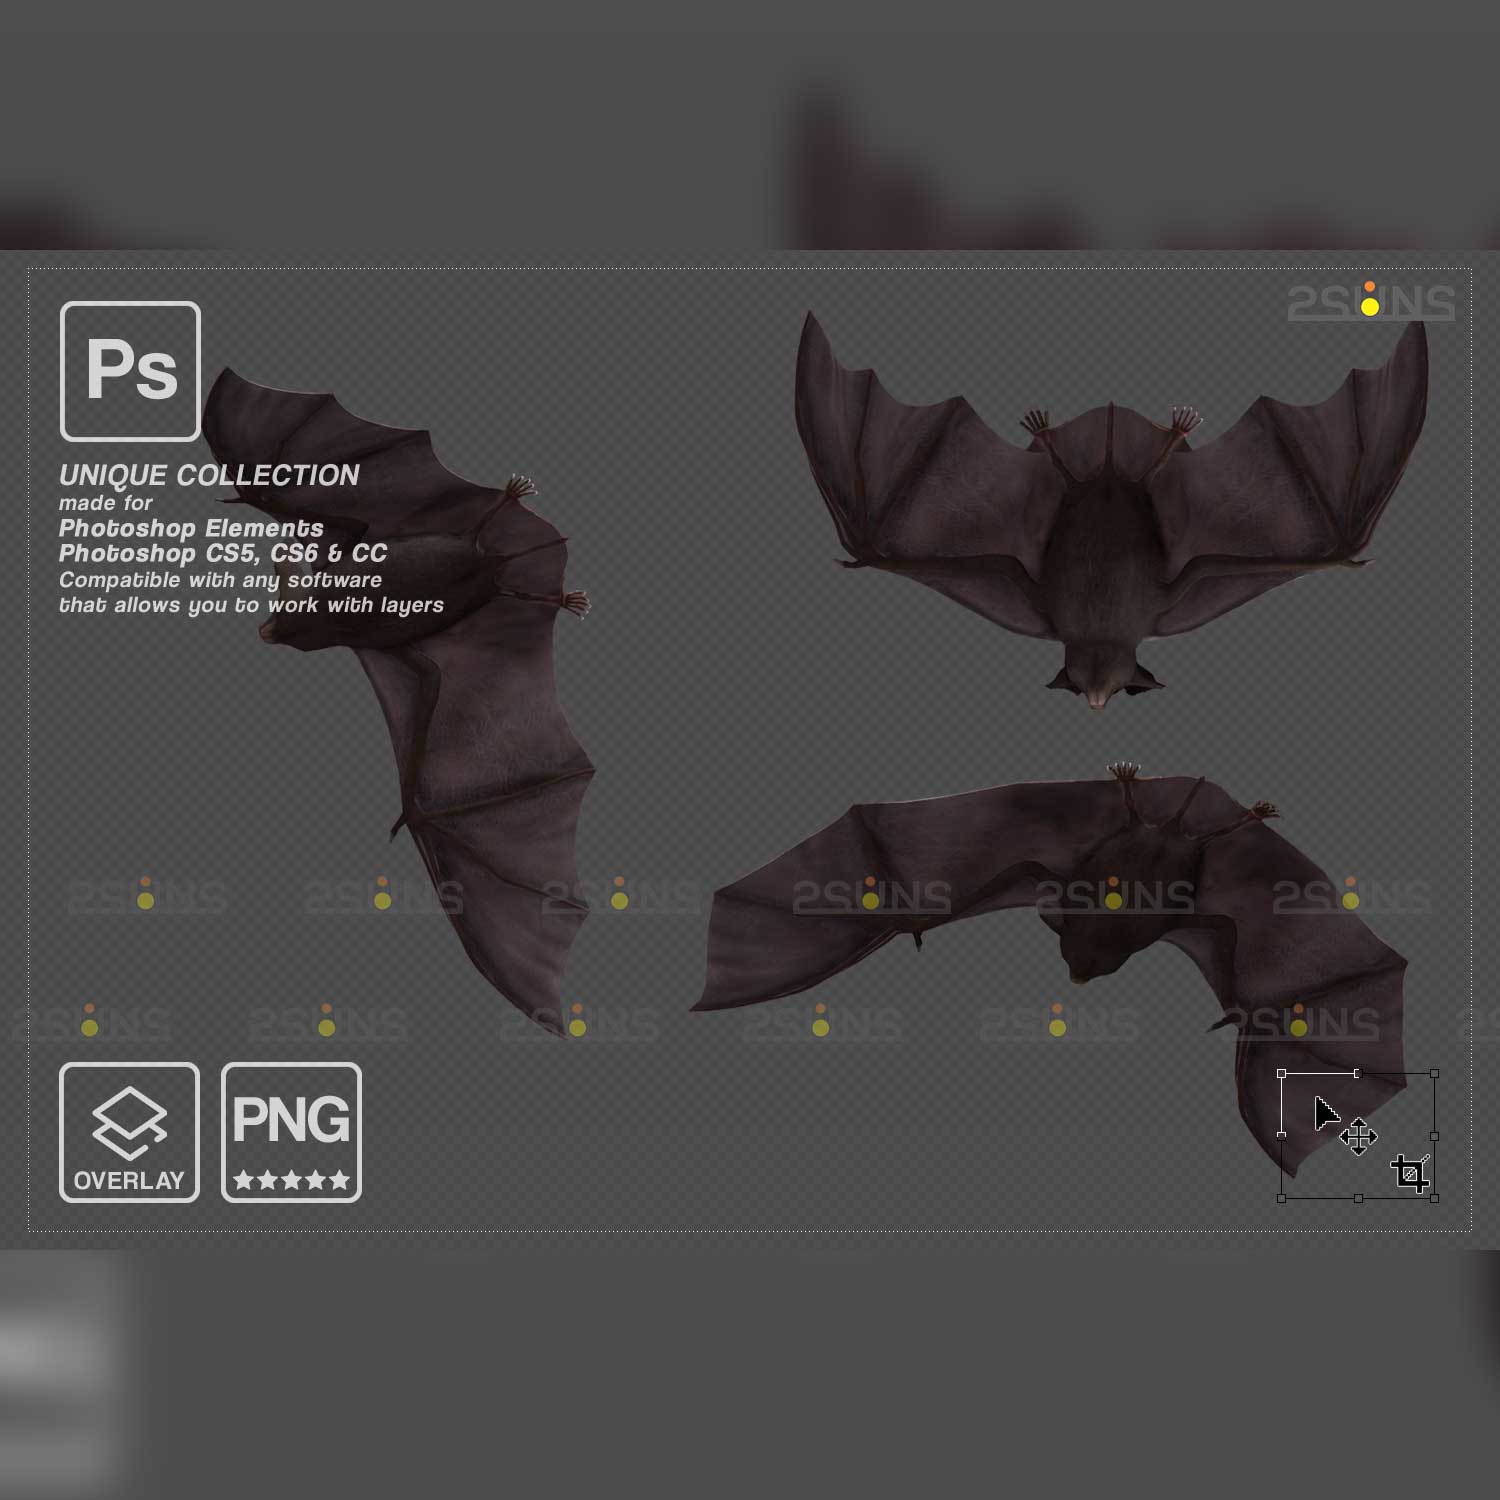 Scary Halloween Bat Overlay cover image.